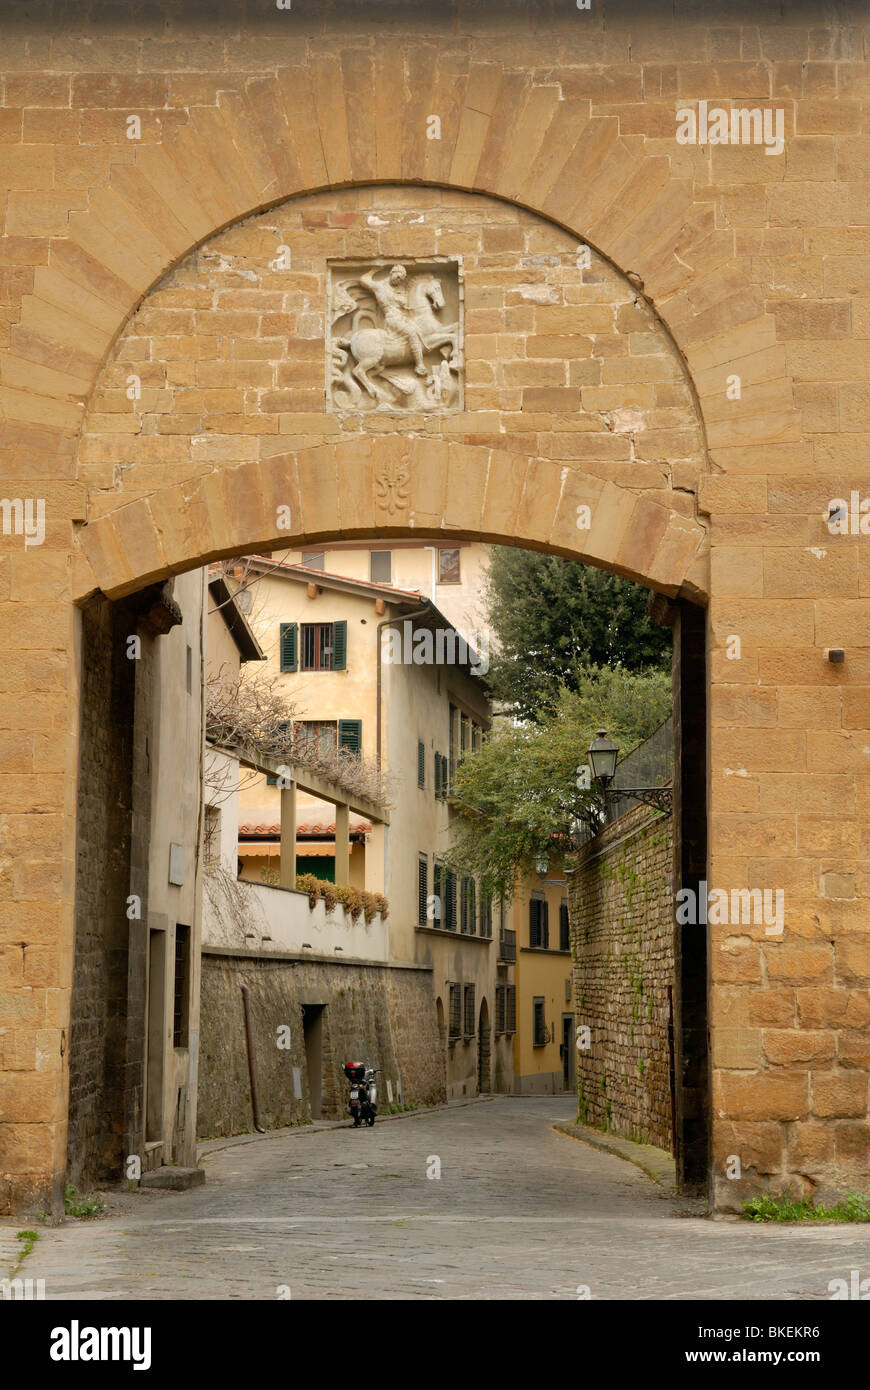 Porta San Giorgio, St, George's Gate, built in 1260, is the oldest surviving gate in Florence. On the facade of the gate is a .. Stock Photo